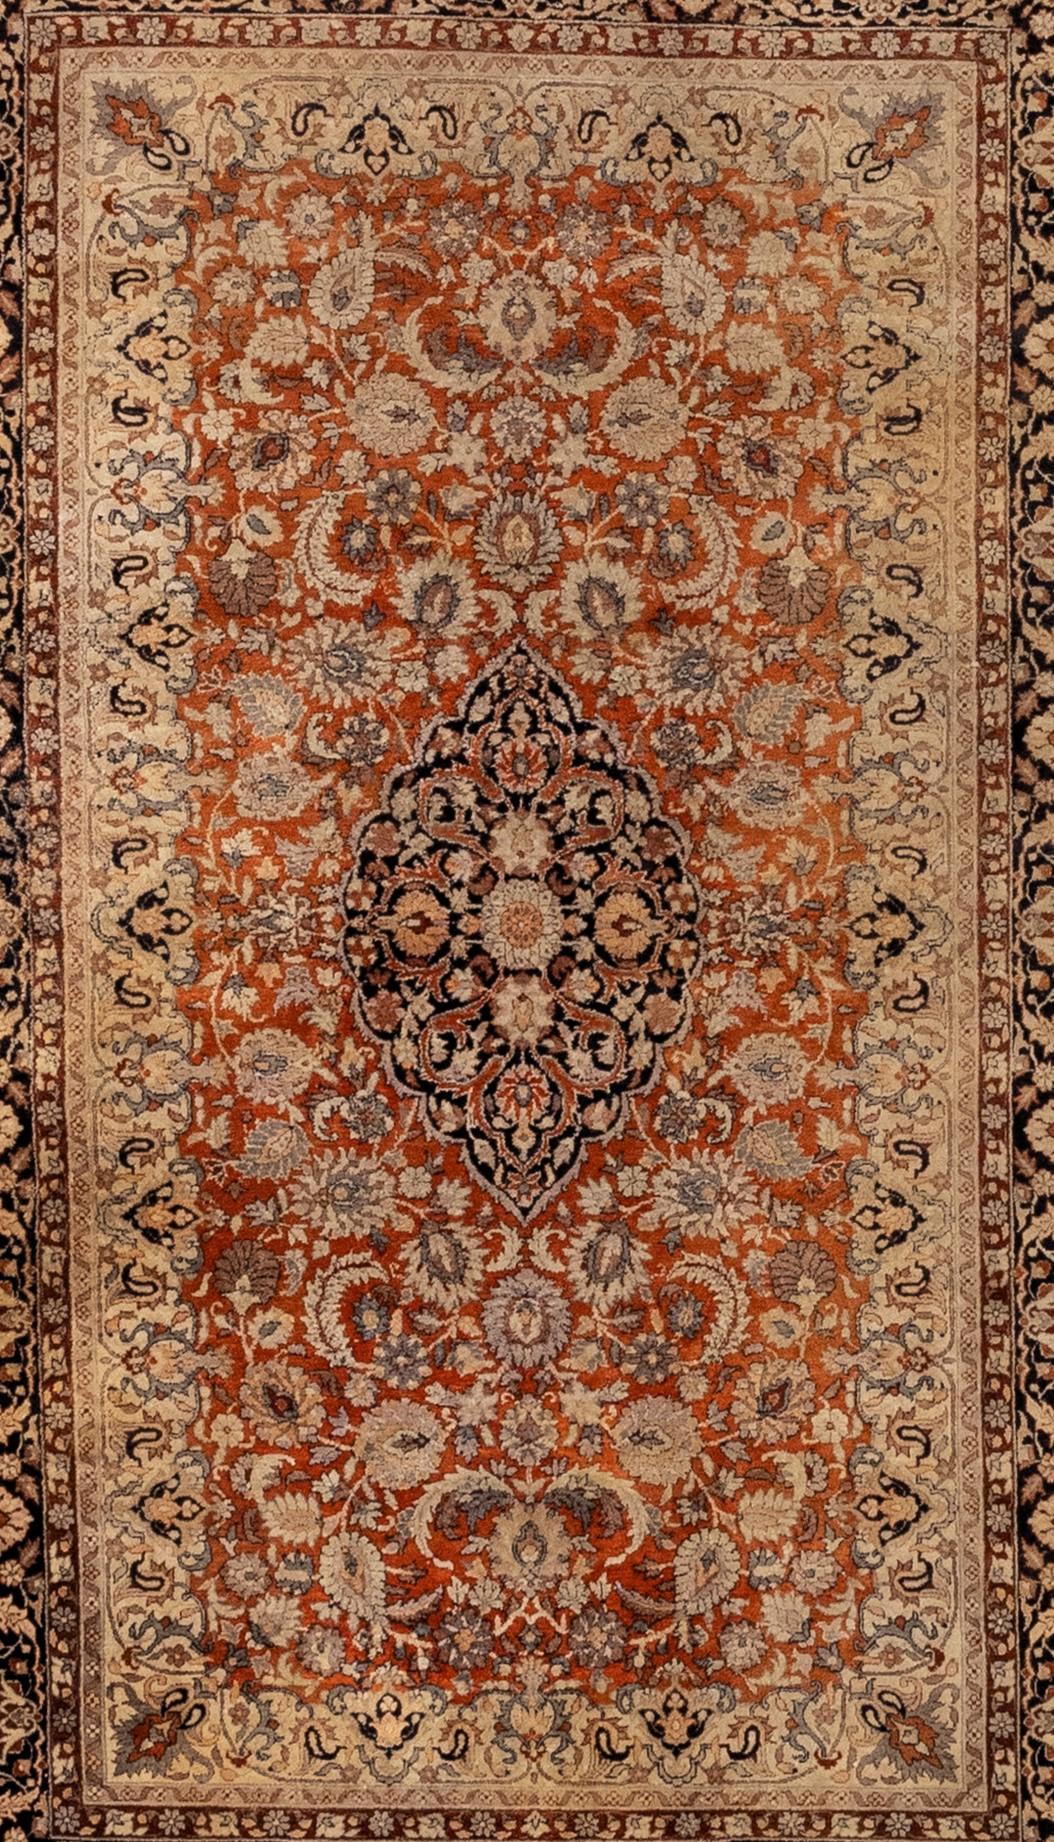 19th Century RedIvory Field w/Central Medallion Trailing Floral Vines Keshan Rug In Good Condition For Sale In Los Angeles, CA